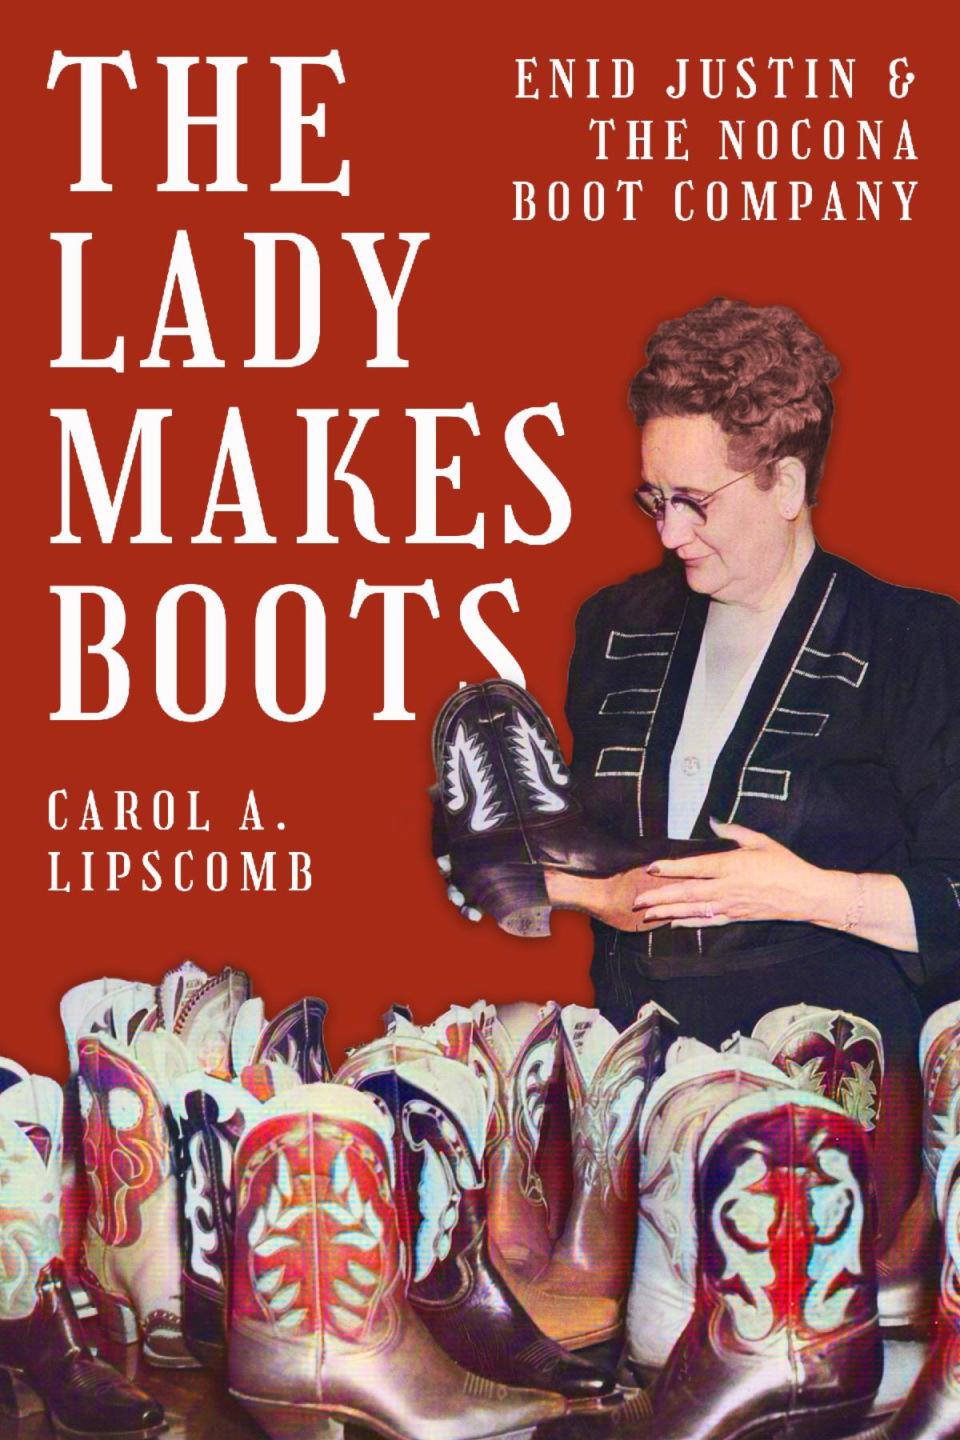 "The Lady Makes Boots" by Carol A. Lipscomb